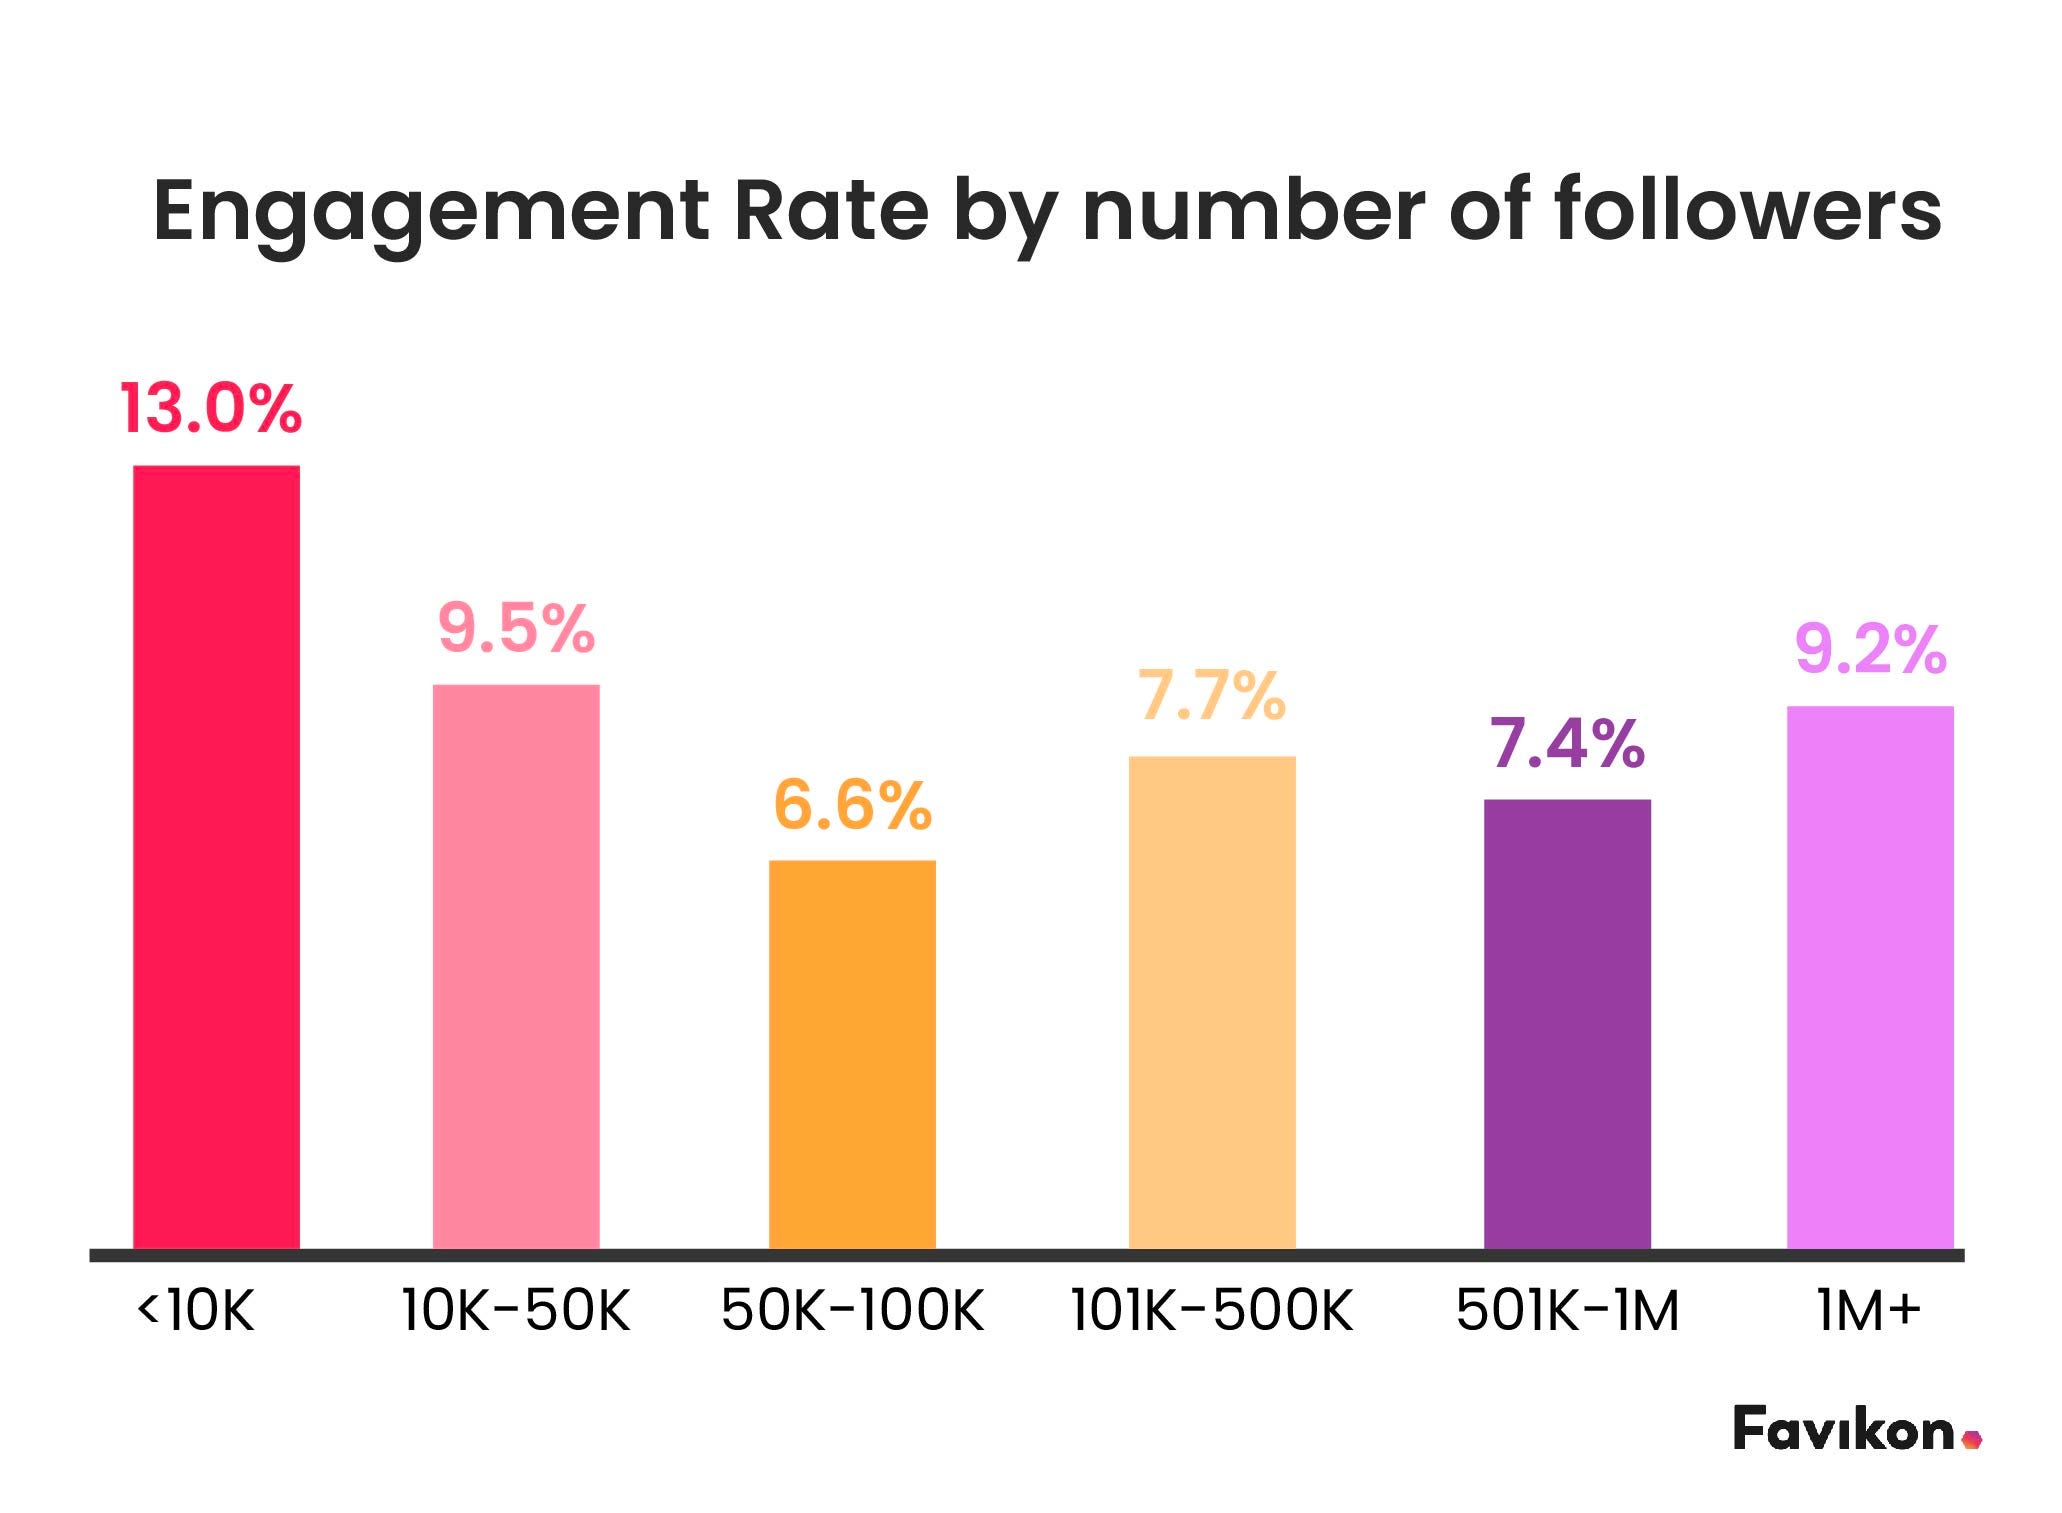 How to calculate the engagement rate on Instagram?